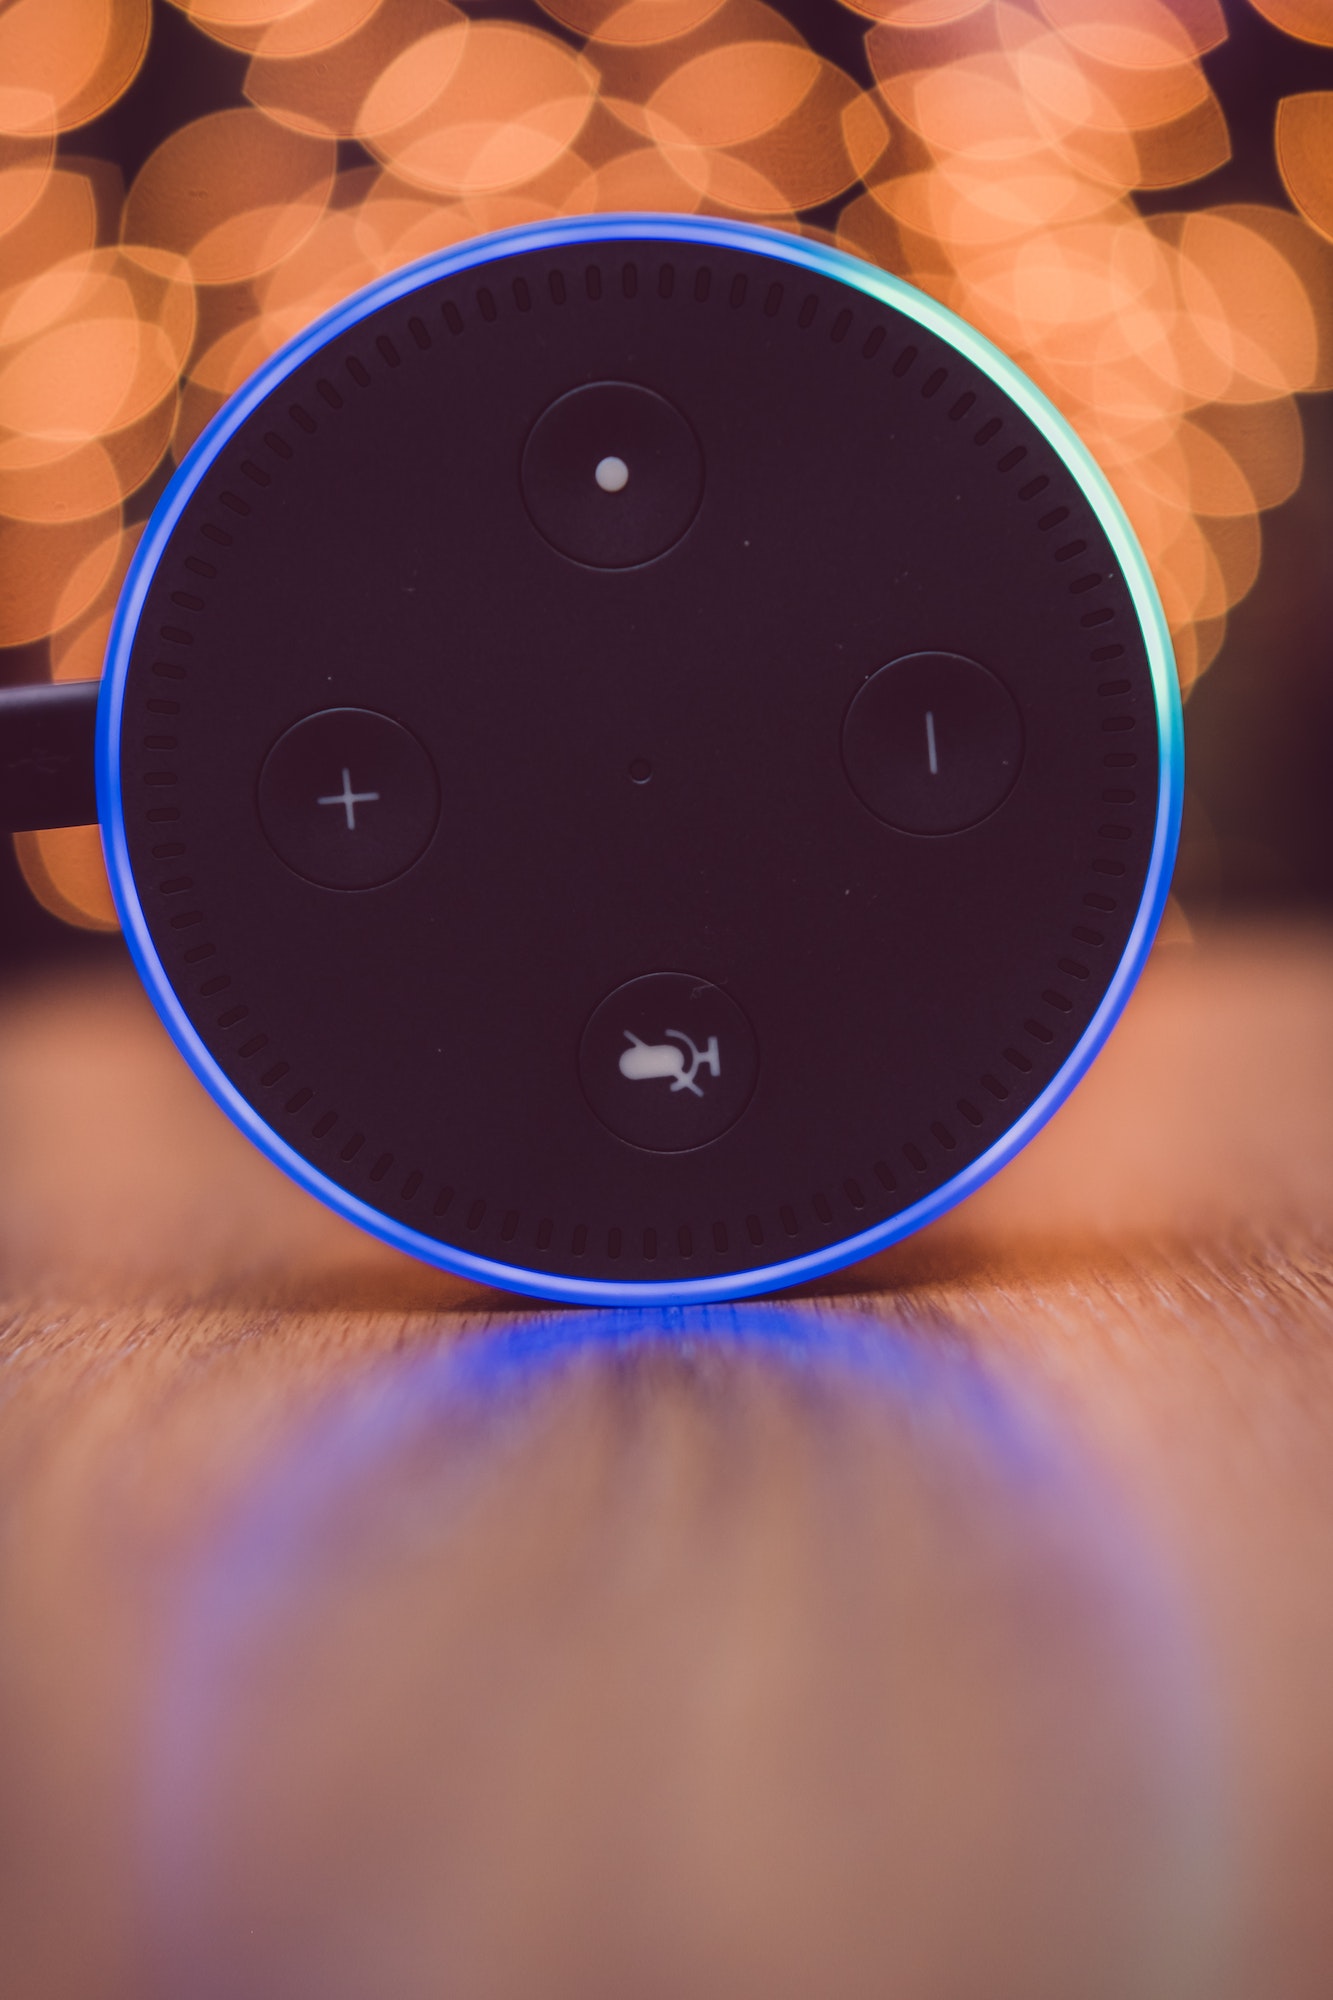 Amazon Alexa echo dot on wooden table with lights in the background, smart speaker, smart home